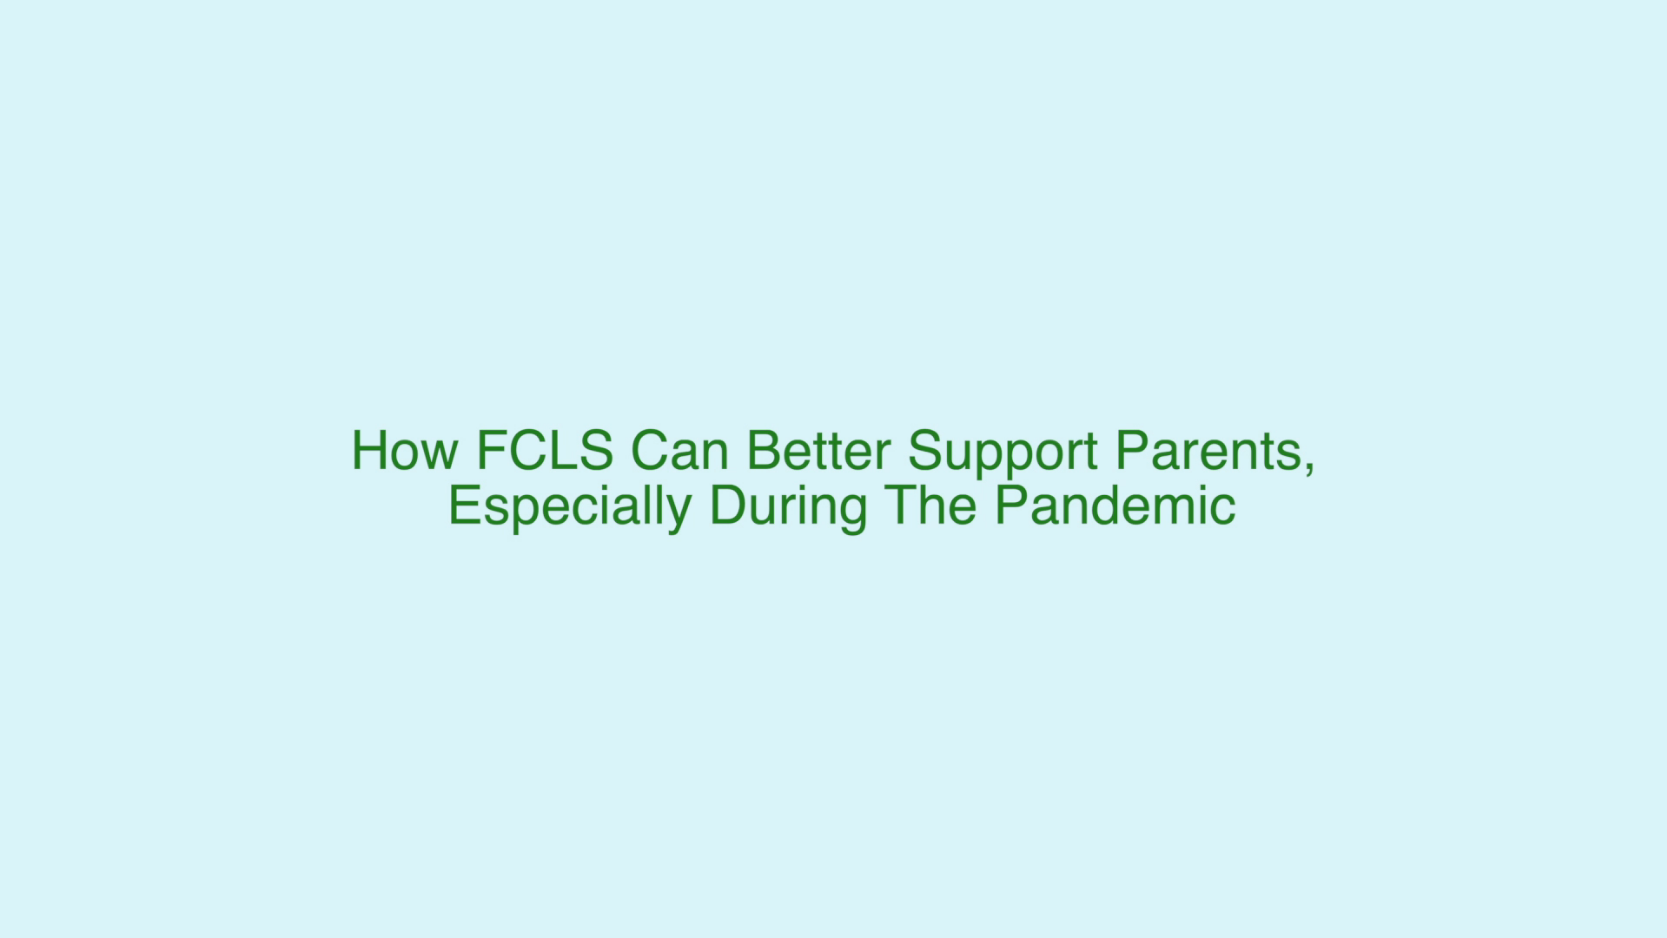 ACS Rise How FCLS Can Support Parents During The Pandemic